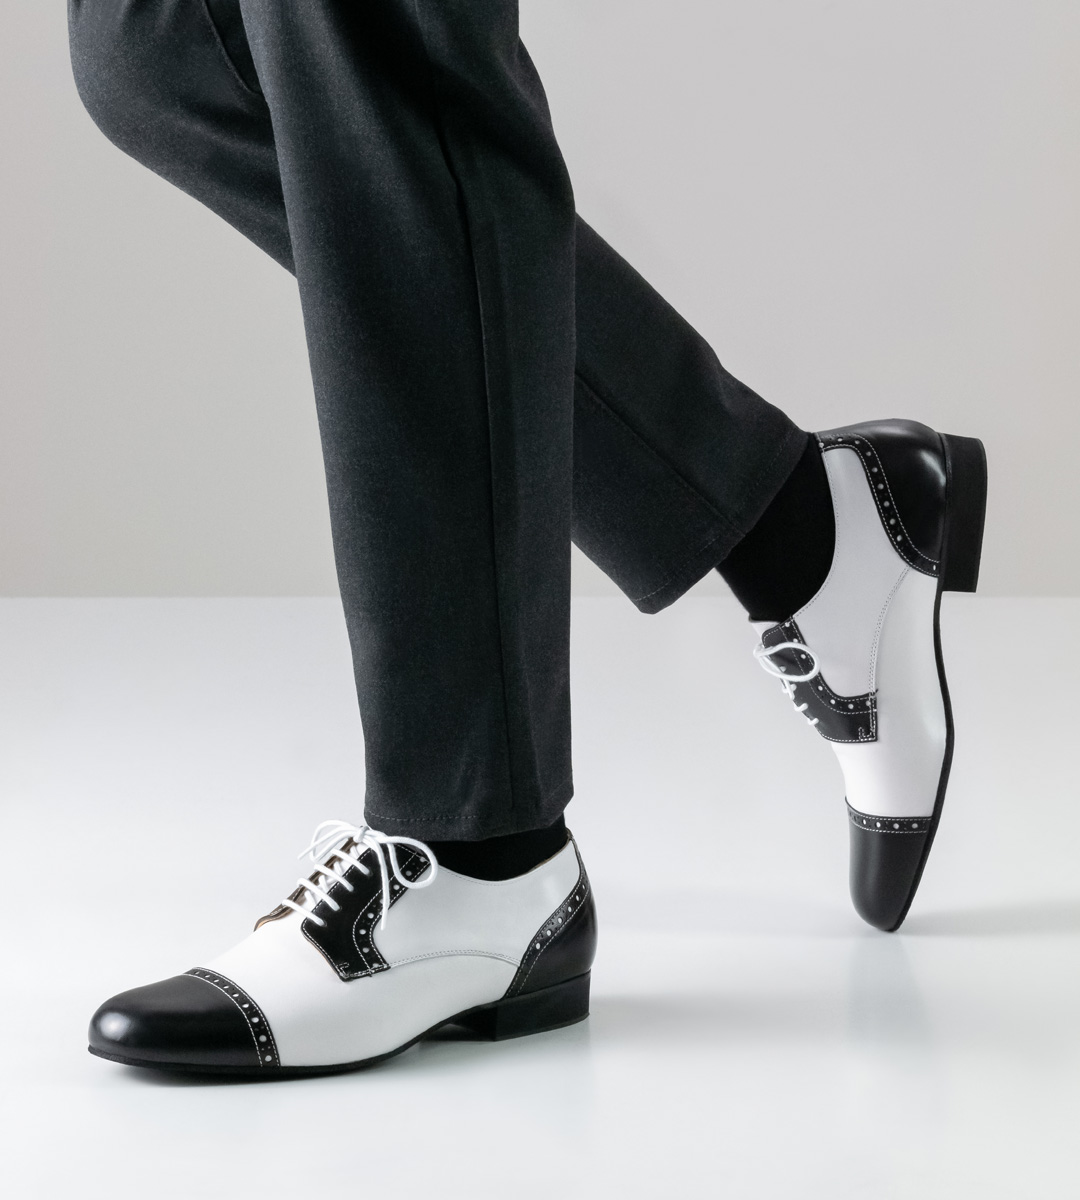 black and white men's dance shoe by Werner Kern in combination with grey trousers